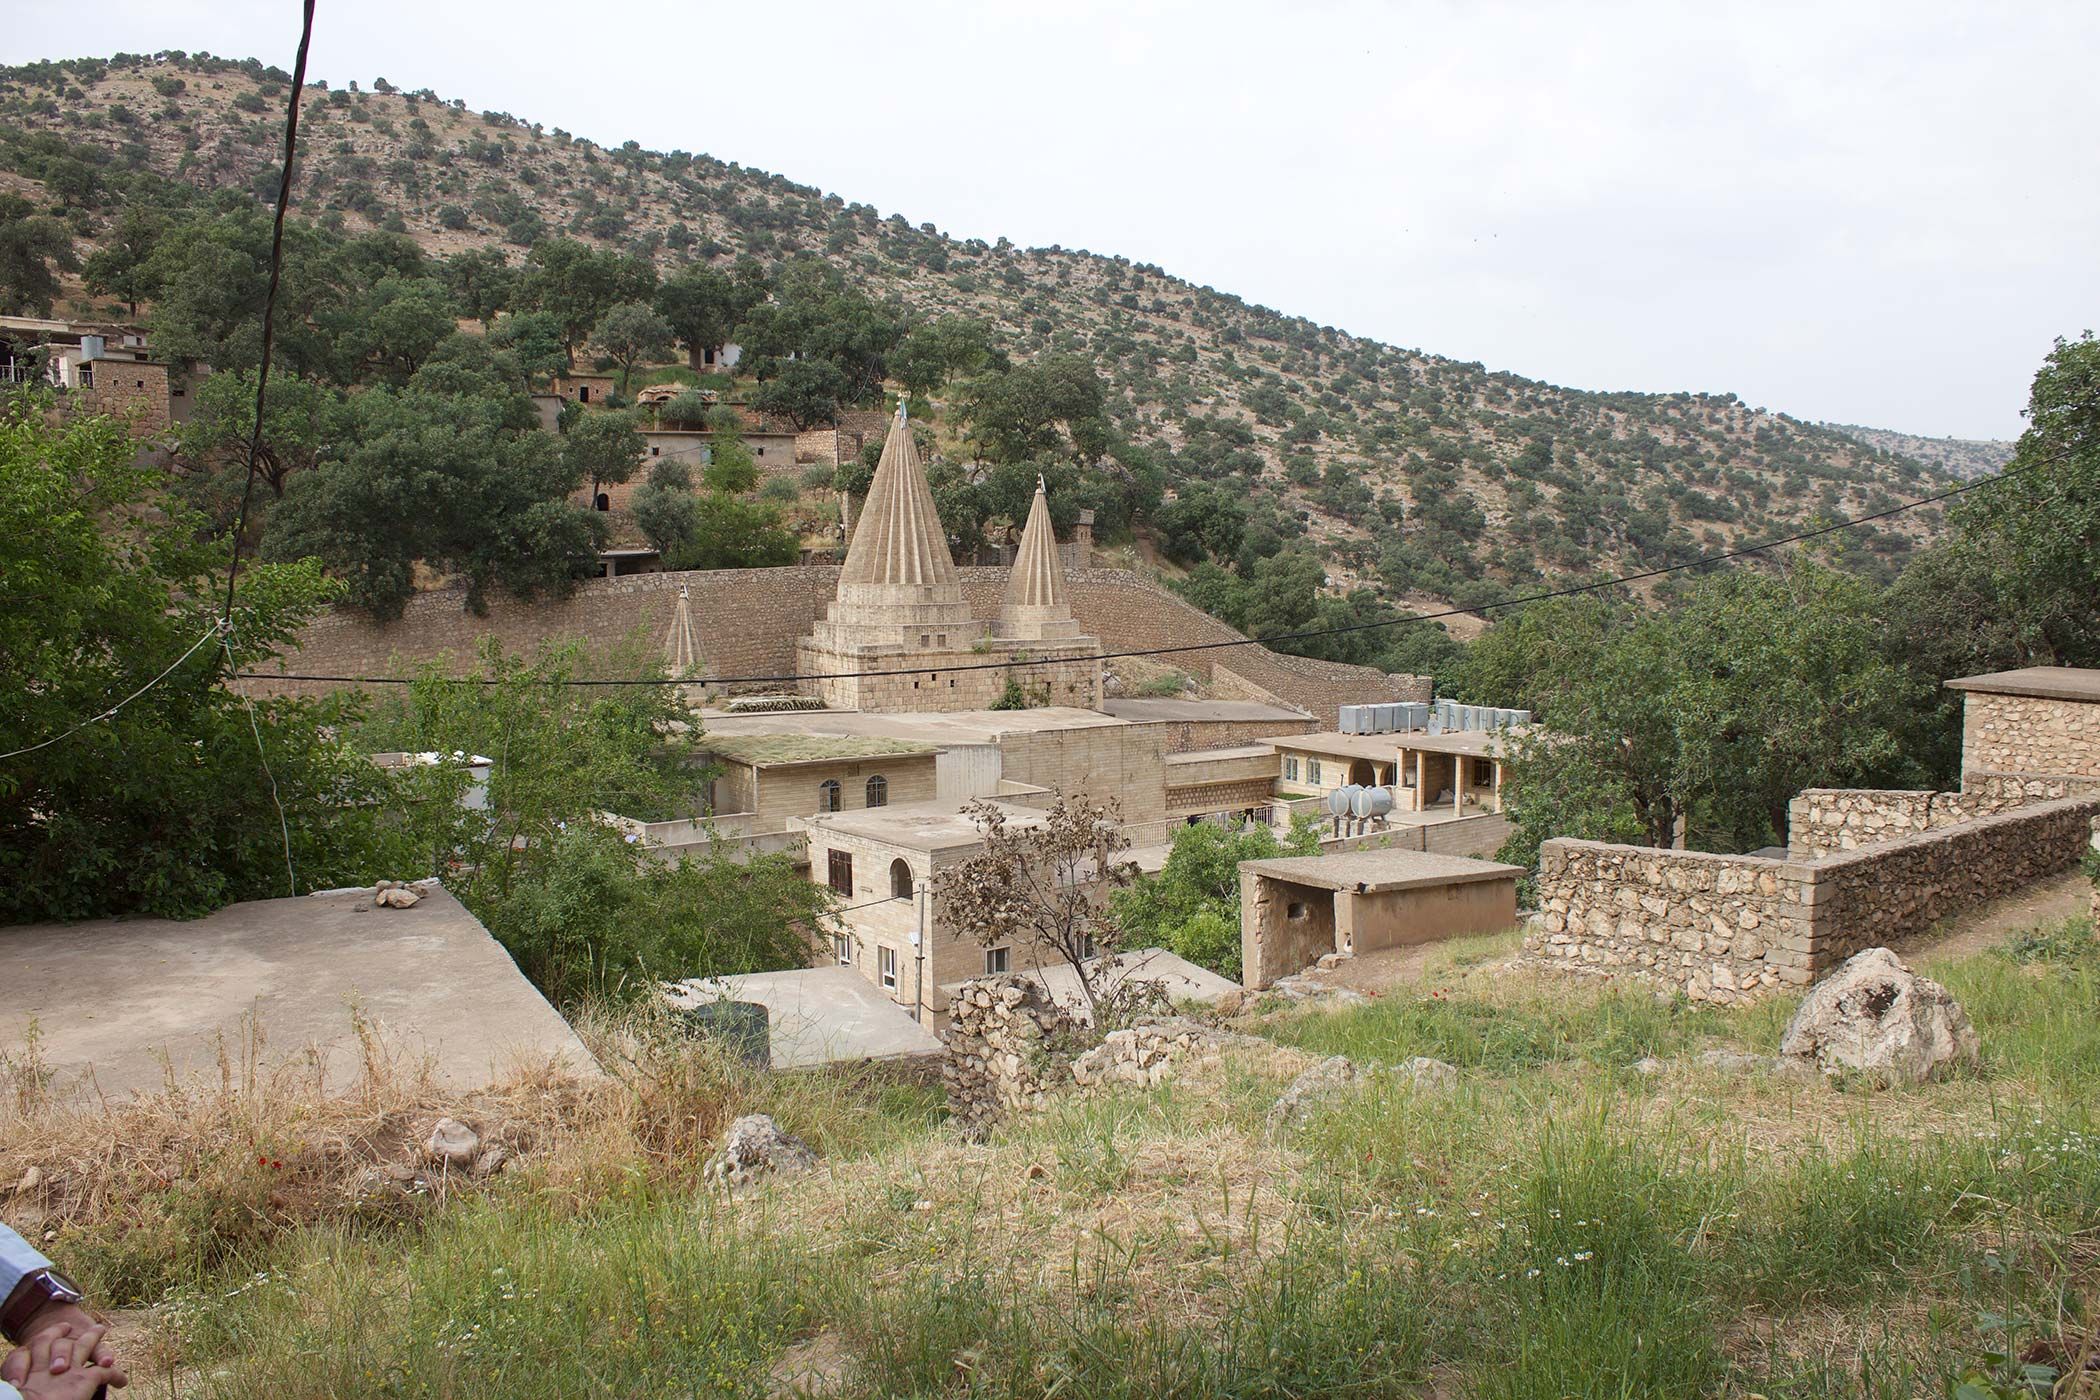 The valley of Lalish in northern Iraq is home to one of the most revered sanctuaries in the Yazidi religion. Participants in the German refugee program stopped at the valley of Lalish for blessings before leaving Iraq. Image by Emily Feldman. Iraq, 2015.